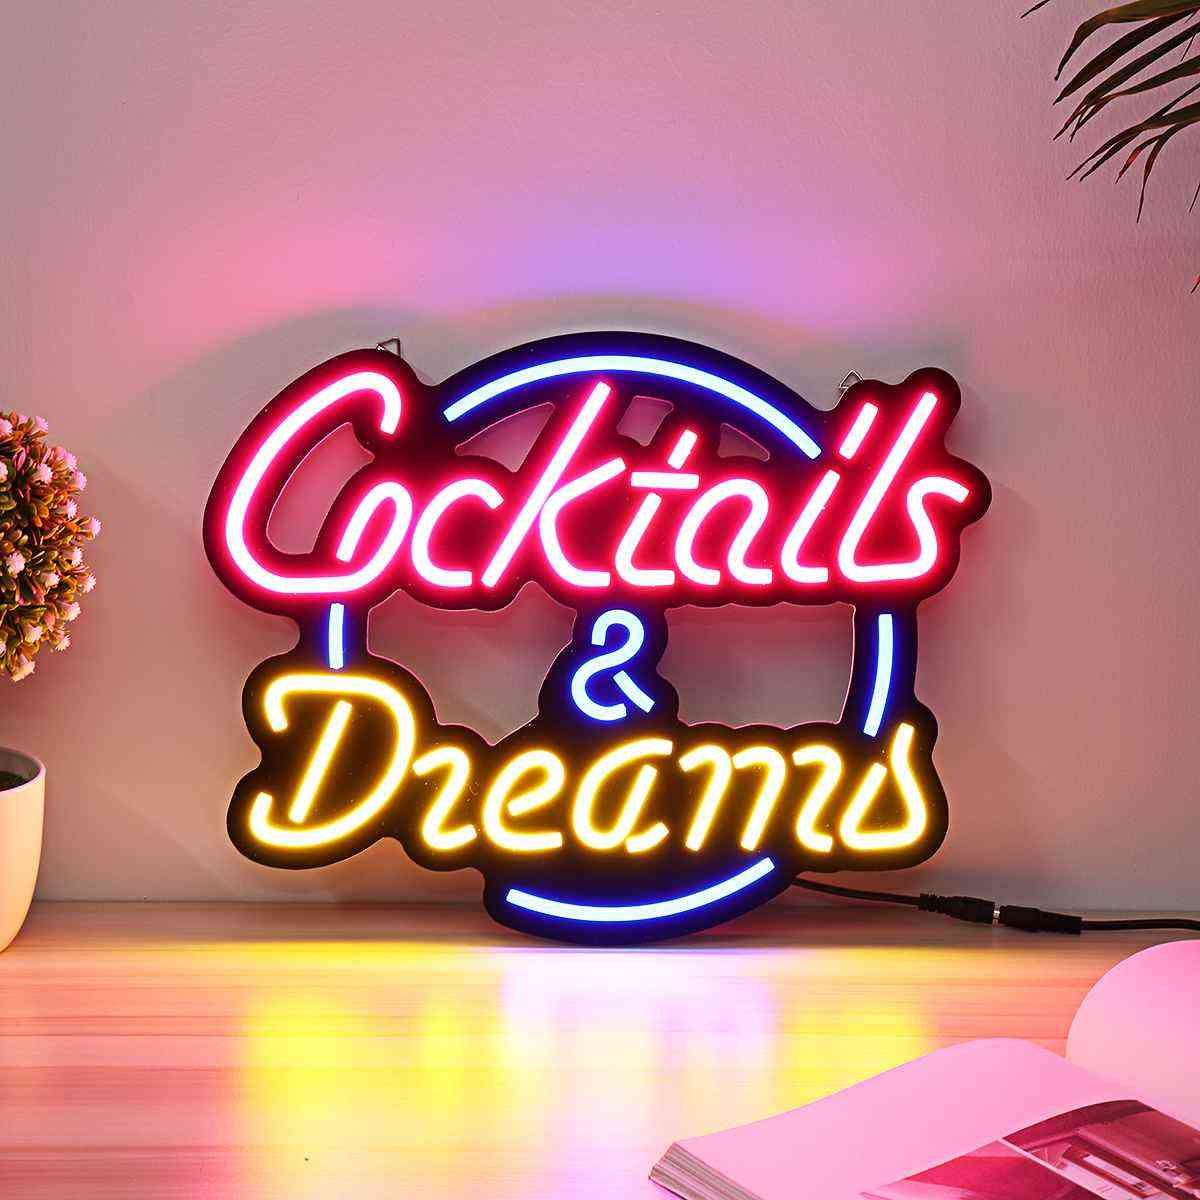 Cocktail Dream Real Glass Tube Neon Light Sign For Decoration